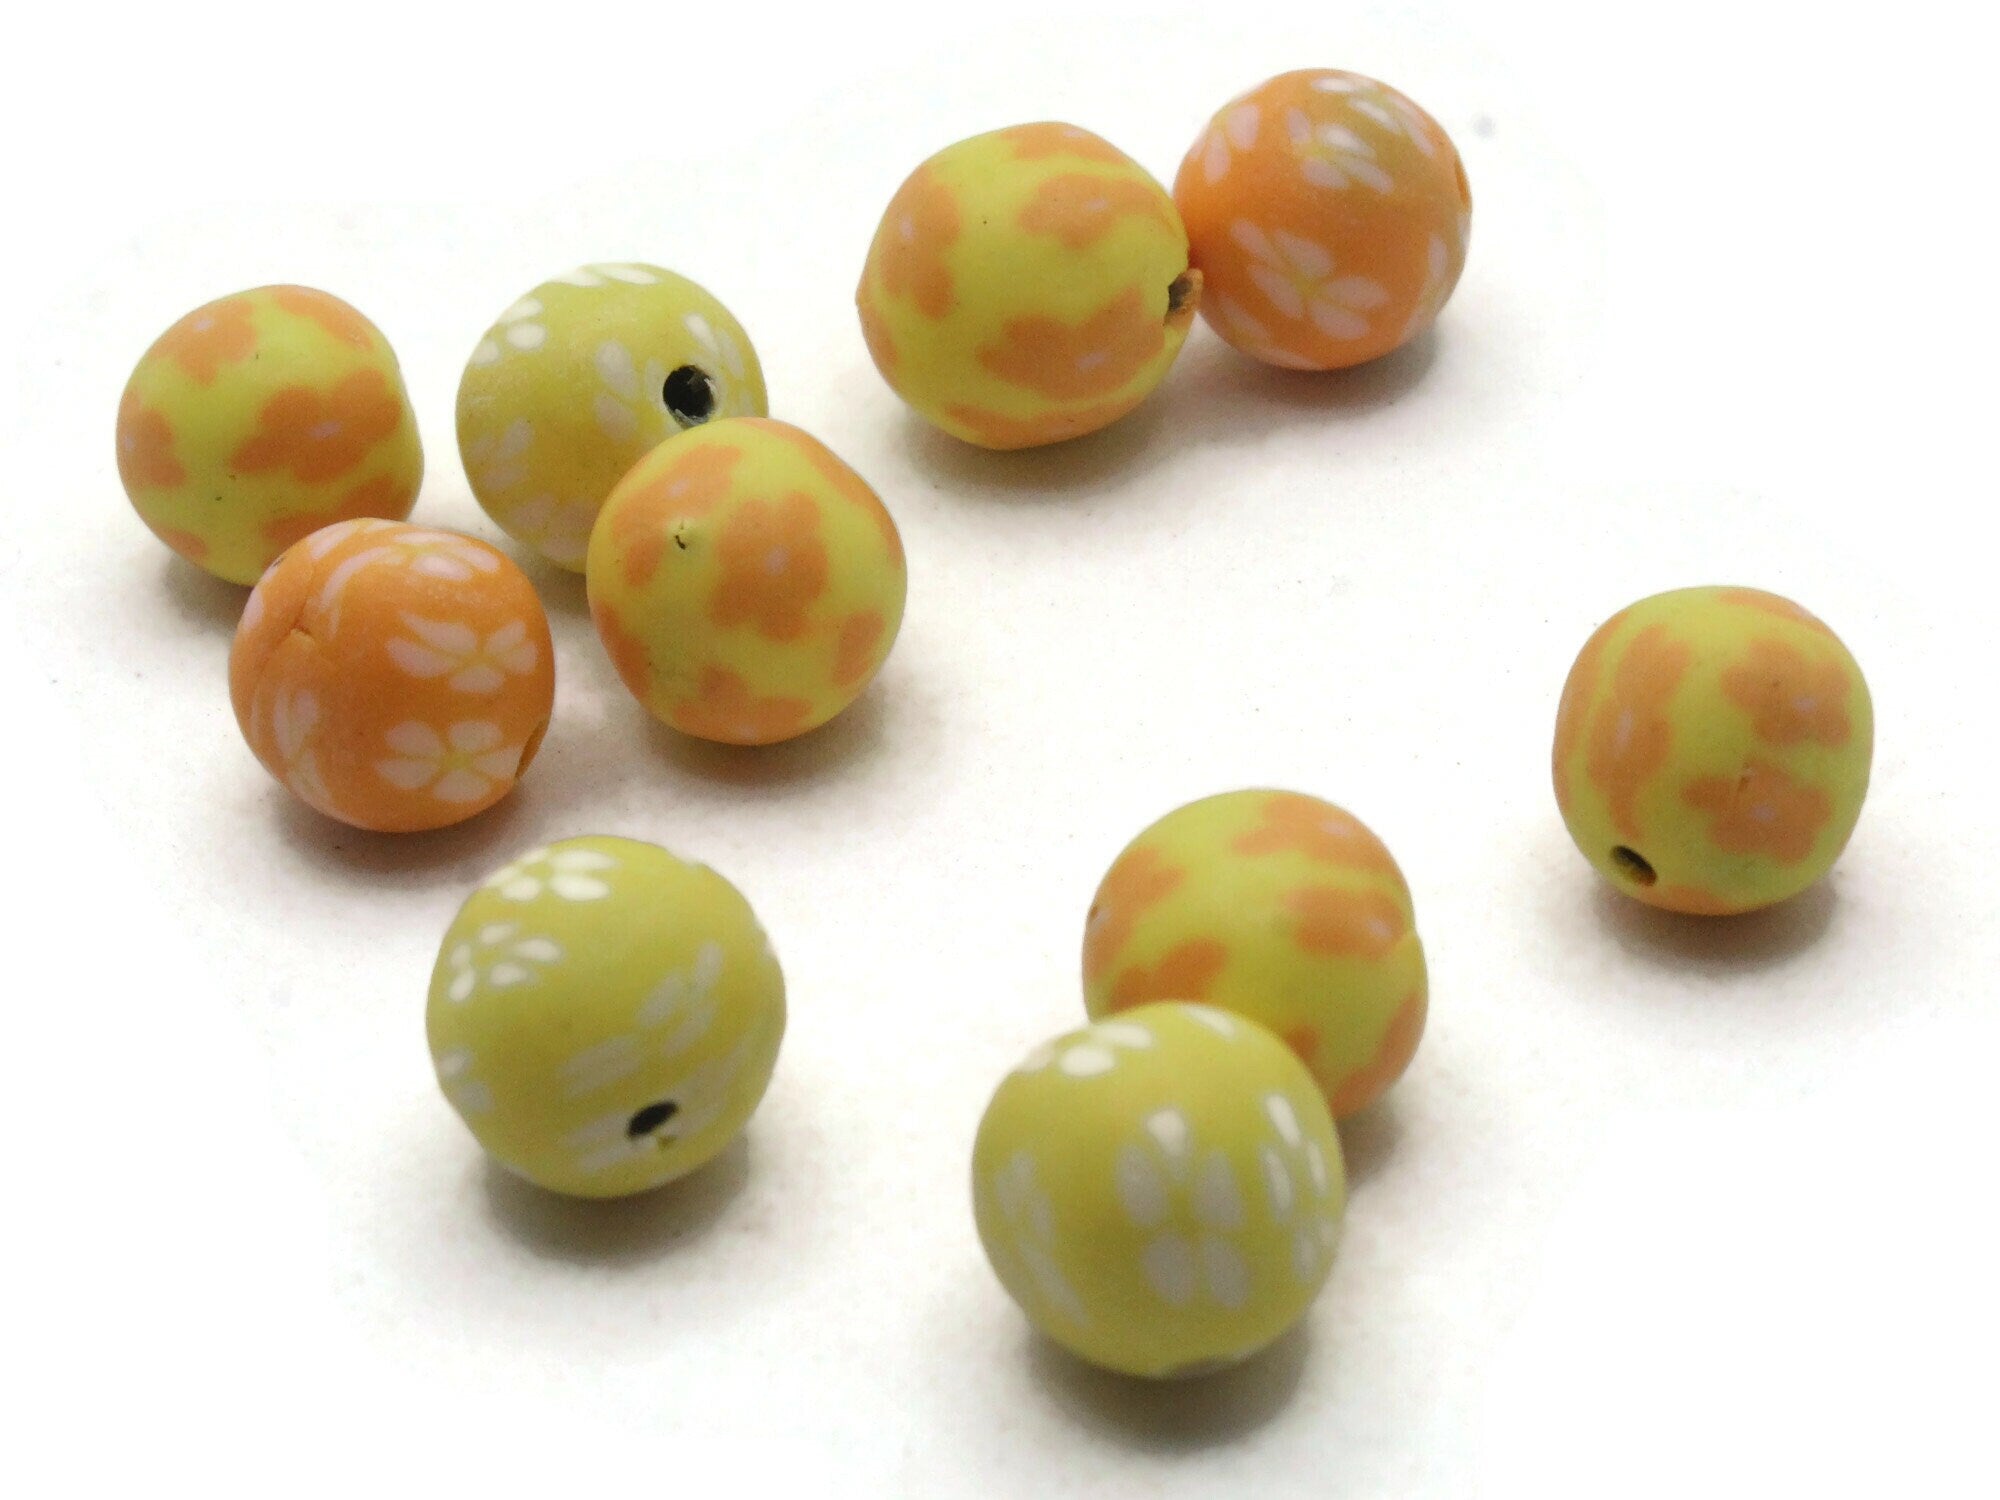 50-100pcs/lot 10mm Multicolor Orange Clay Disco Ball Beads, Clay Beads